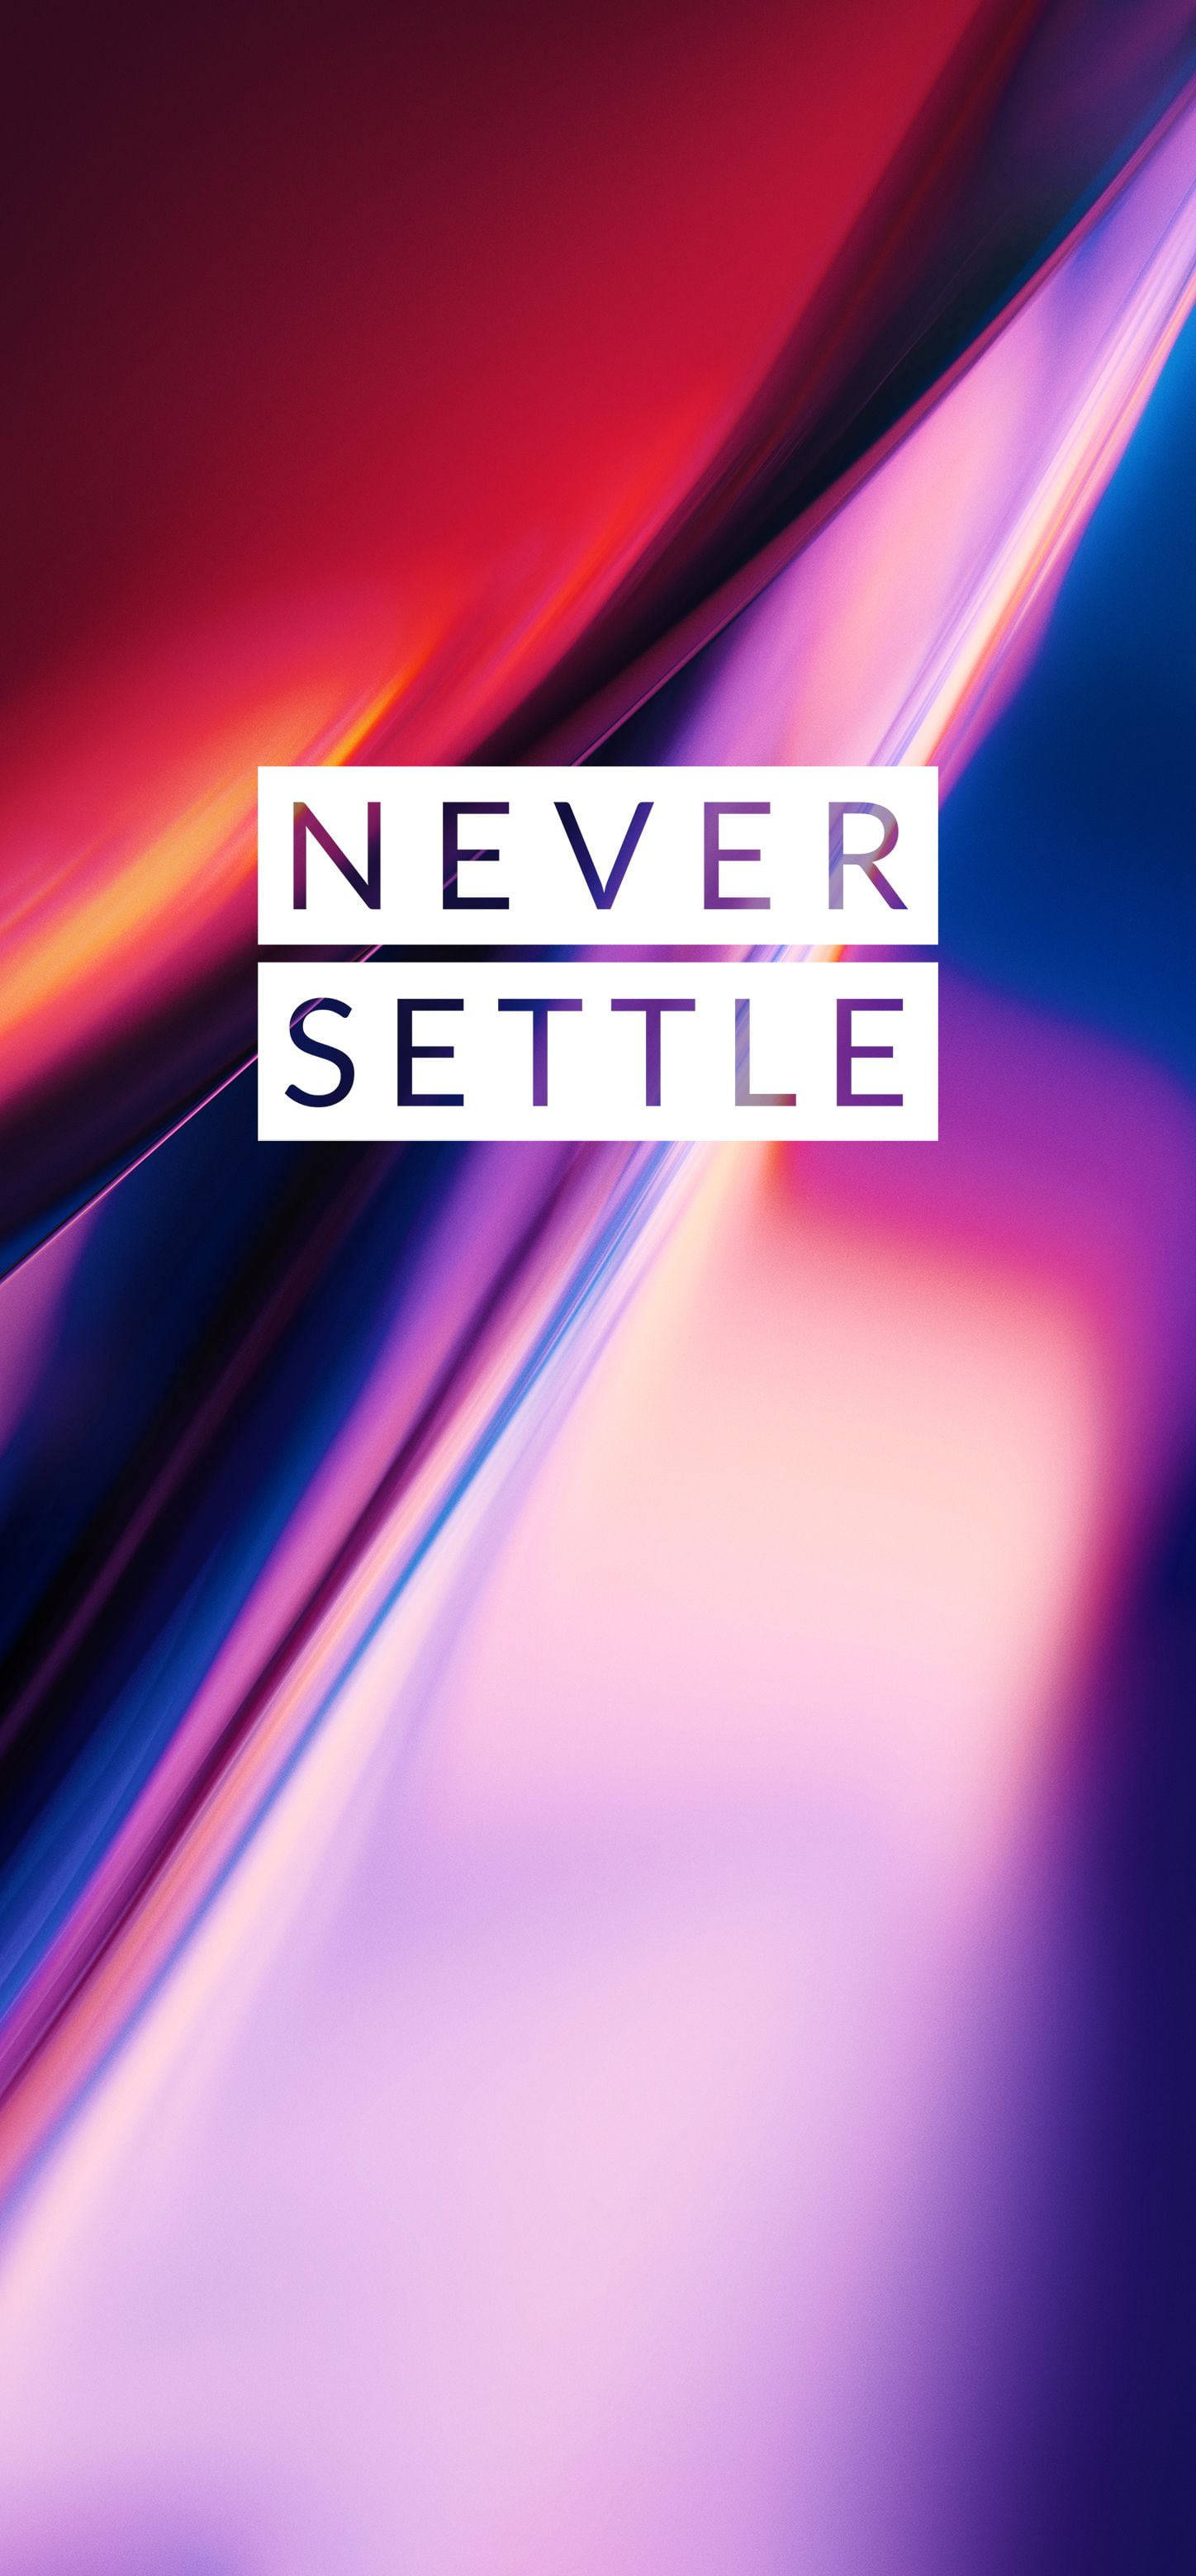 Free Oneplus Wallpaper Downloads 300 Oneplus Wallpapers for FREE   Wallpaperscom